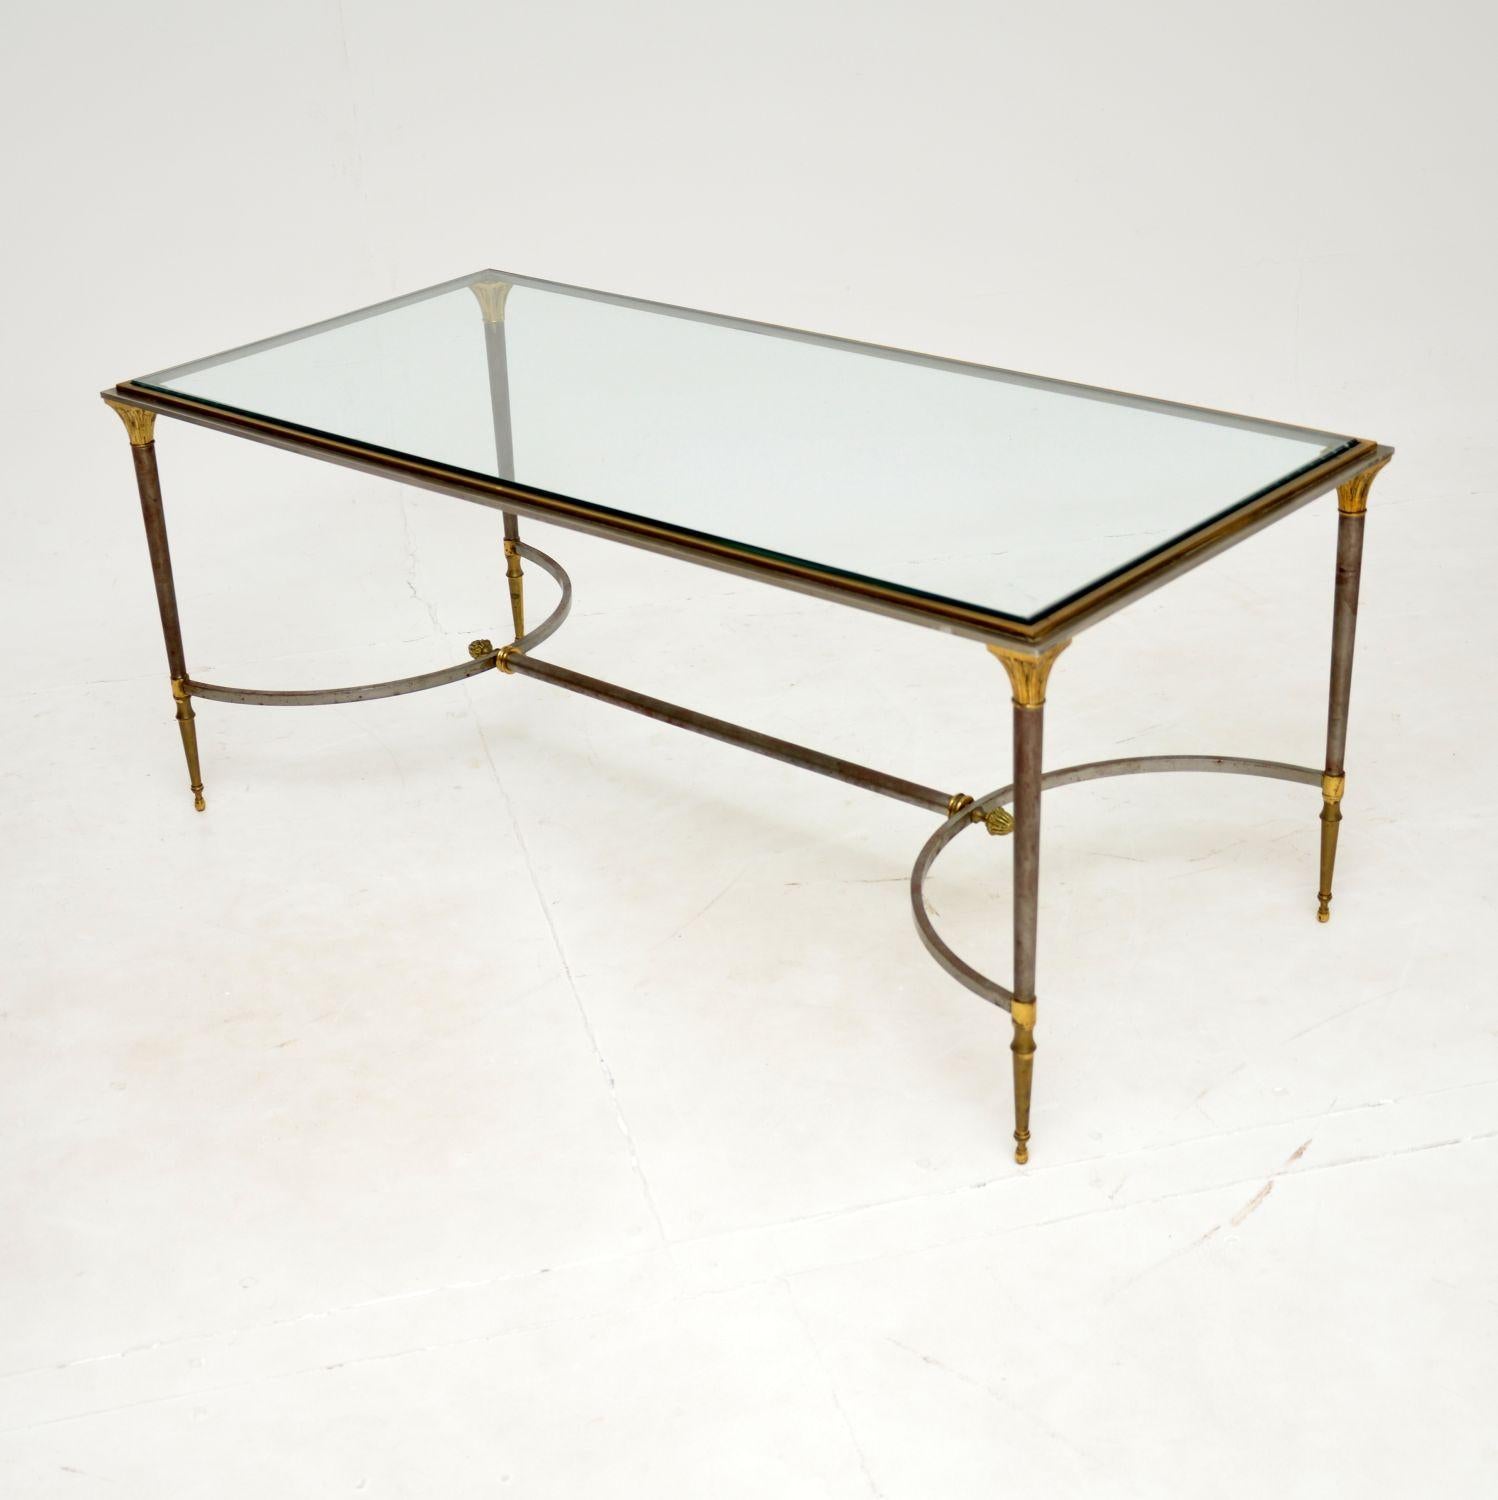 A stunning vintage coffee table of magnificent quality. This was made in France, it dates from around the 1970’s.

The frame is steel with a brass rim around the top and gold leaf embellishments on the base. It has beautiful details like acorn